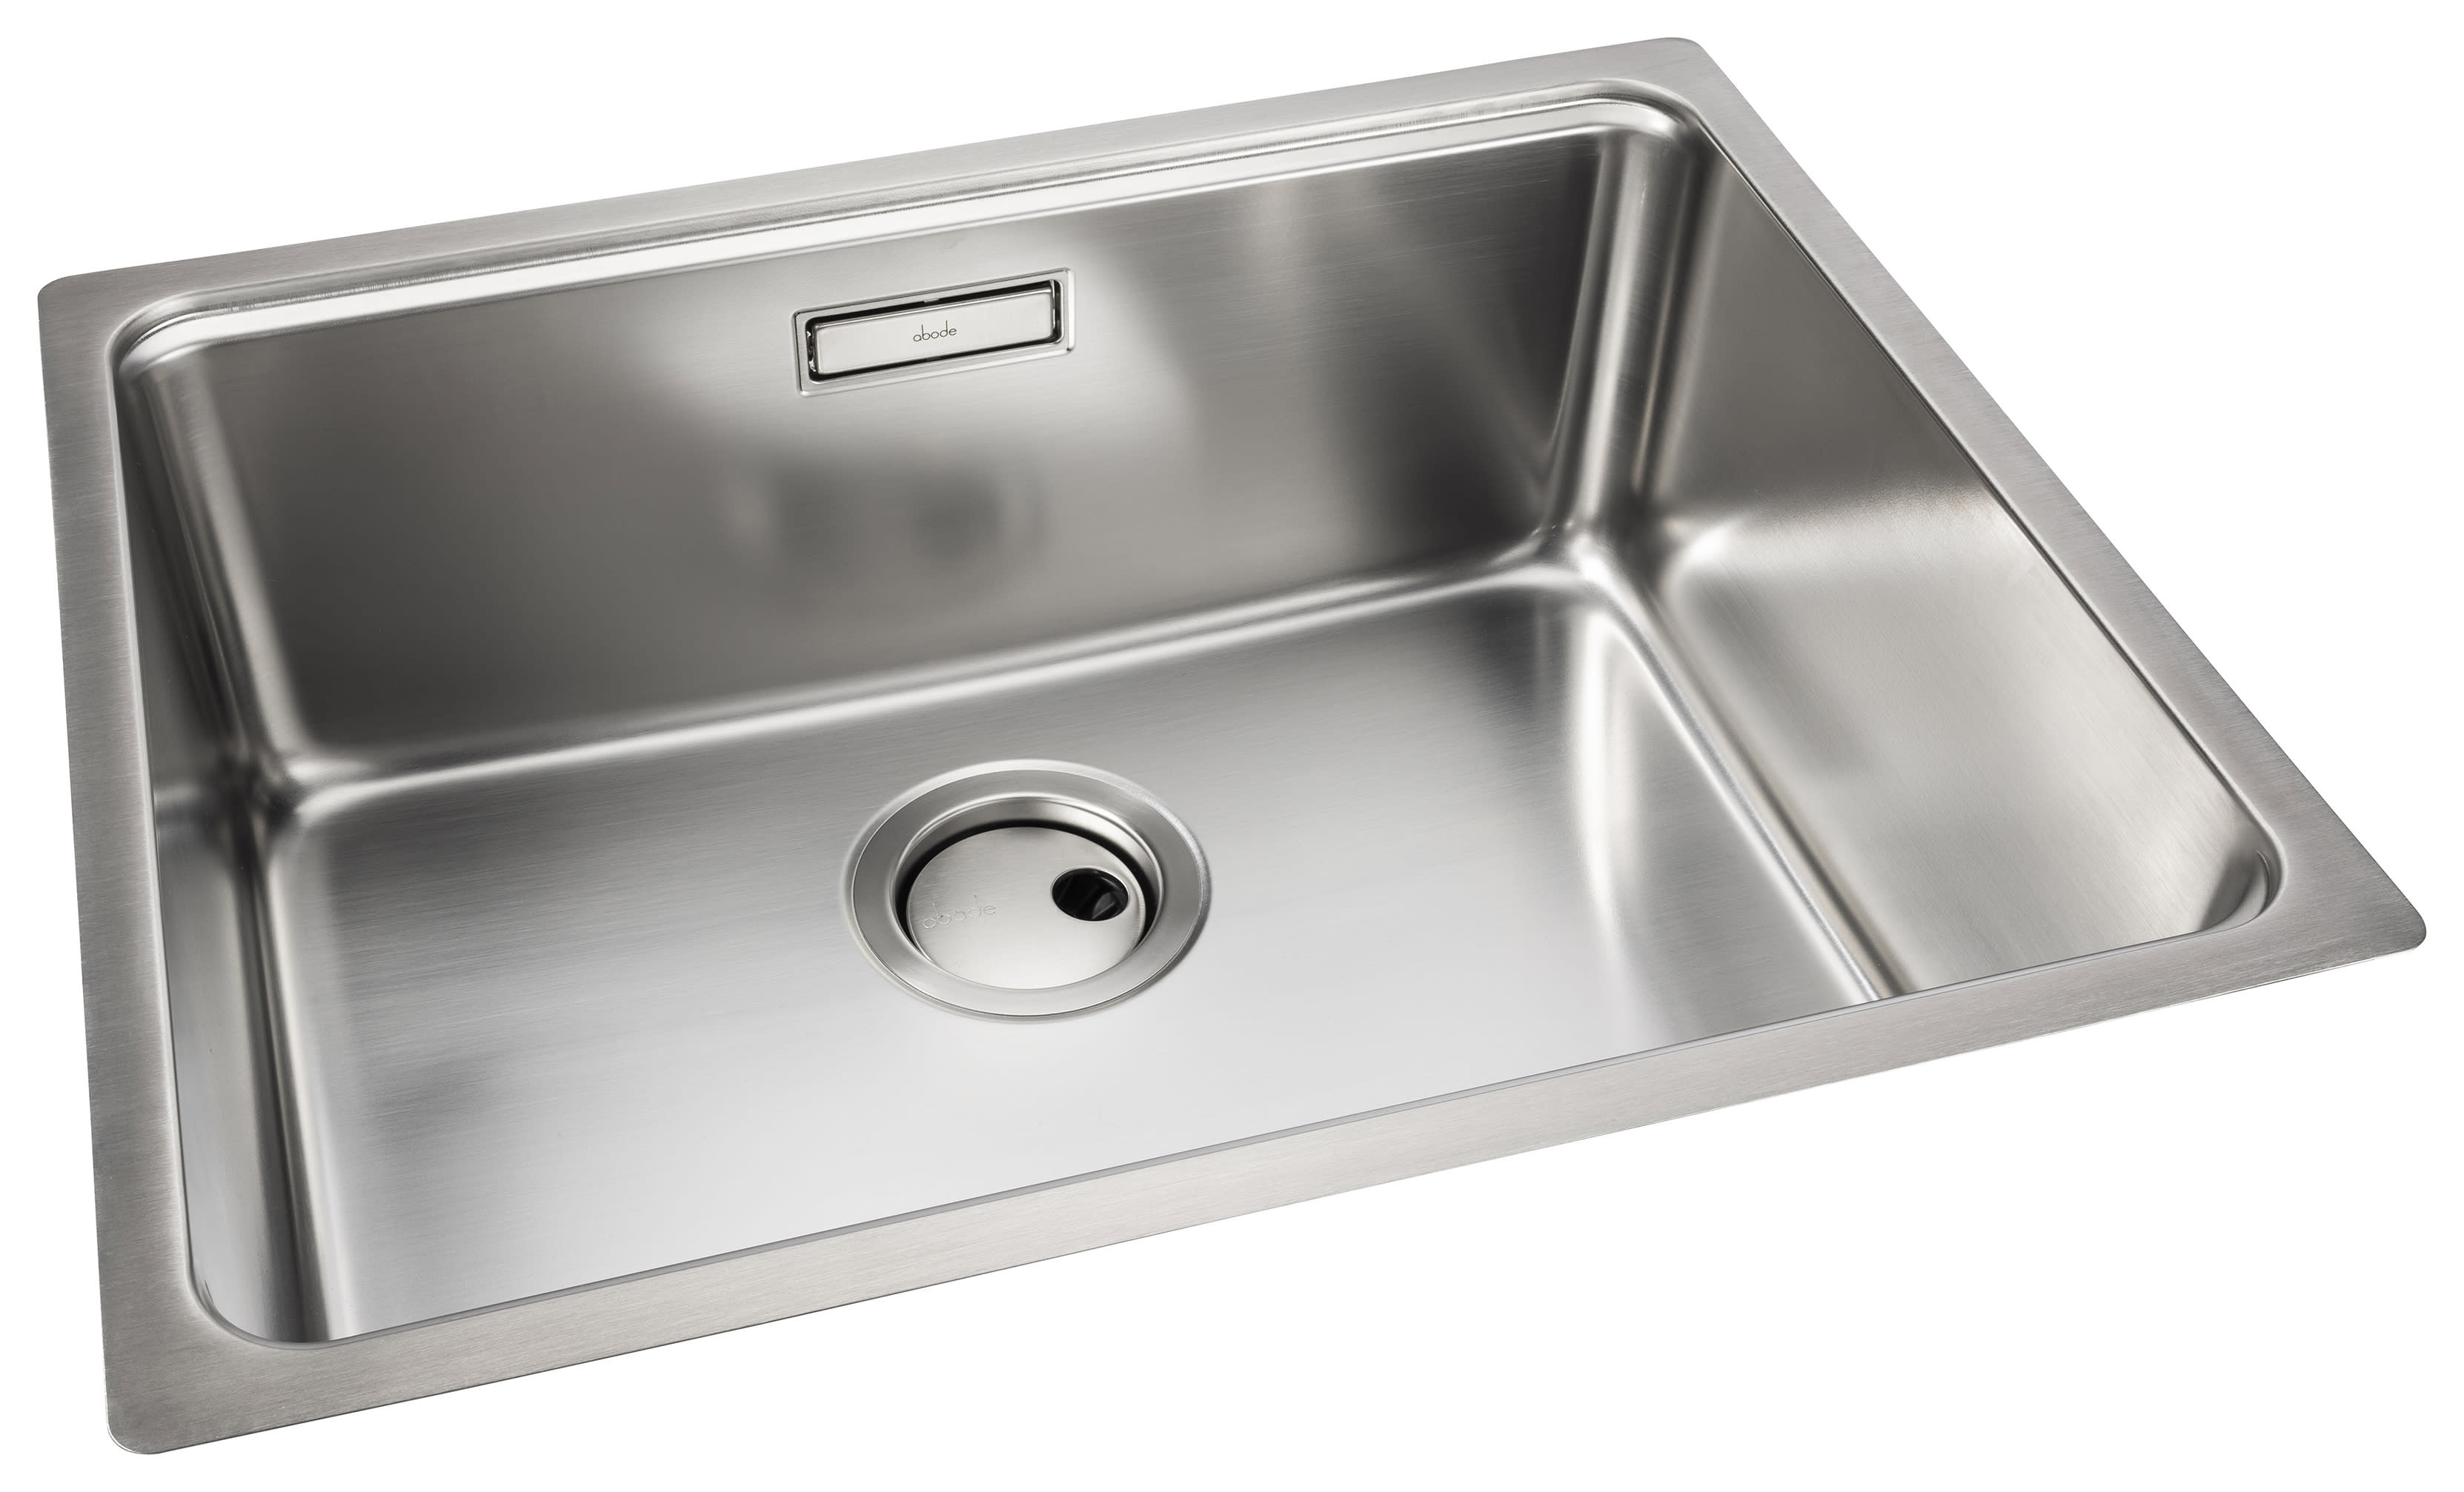 Abode System Sync 1 bowl udermount sink and